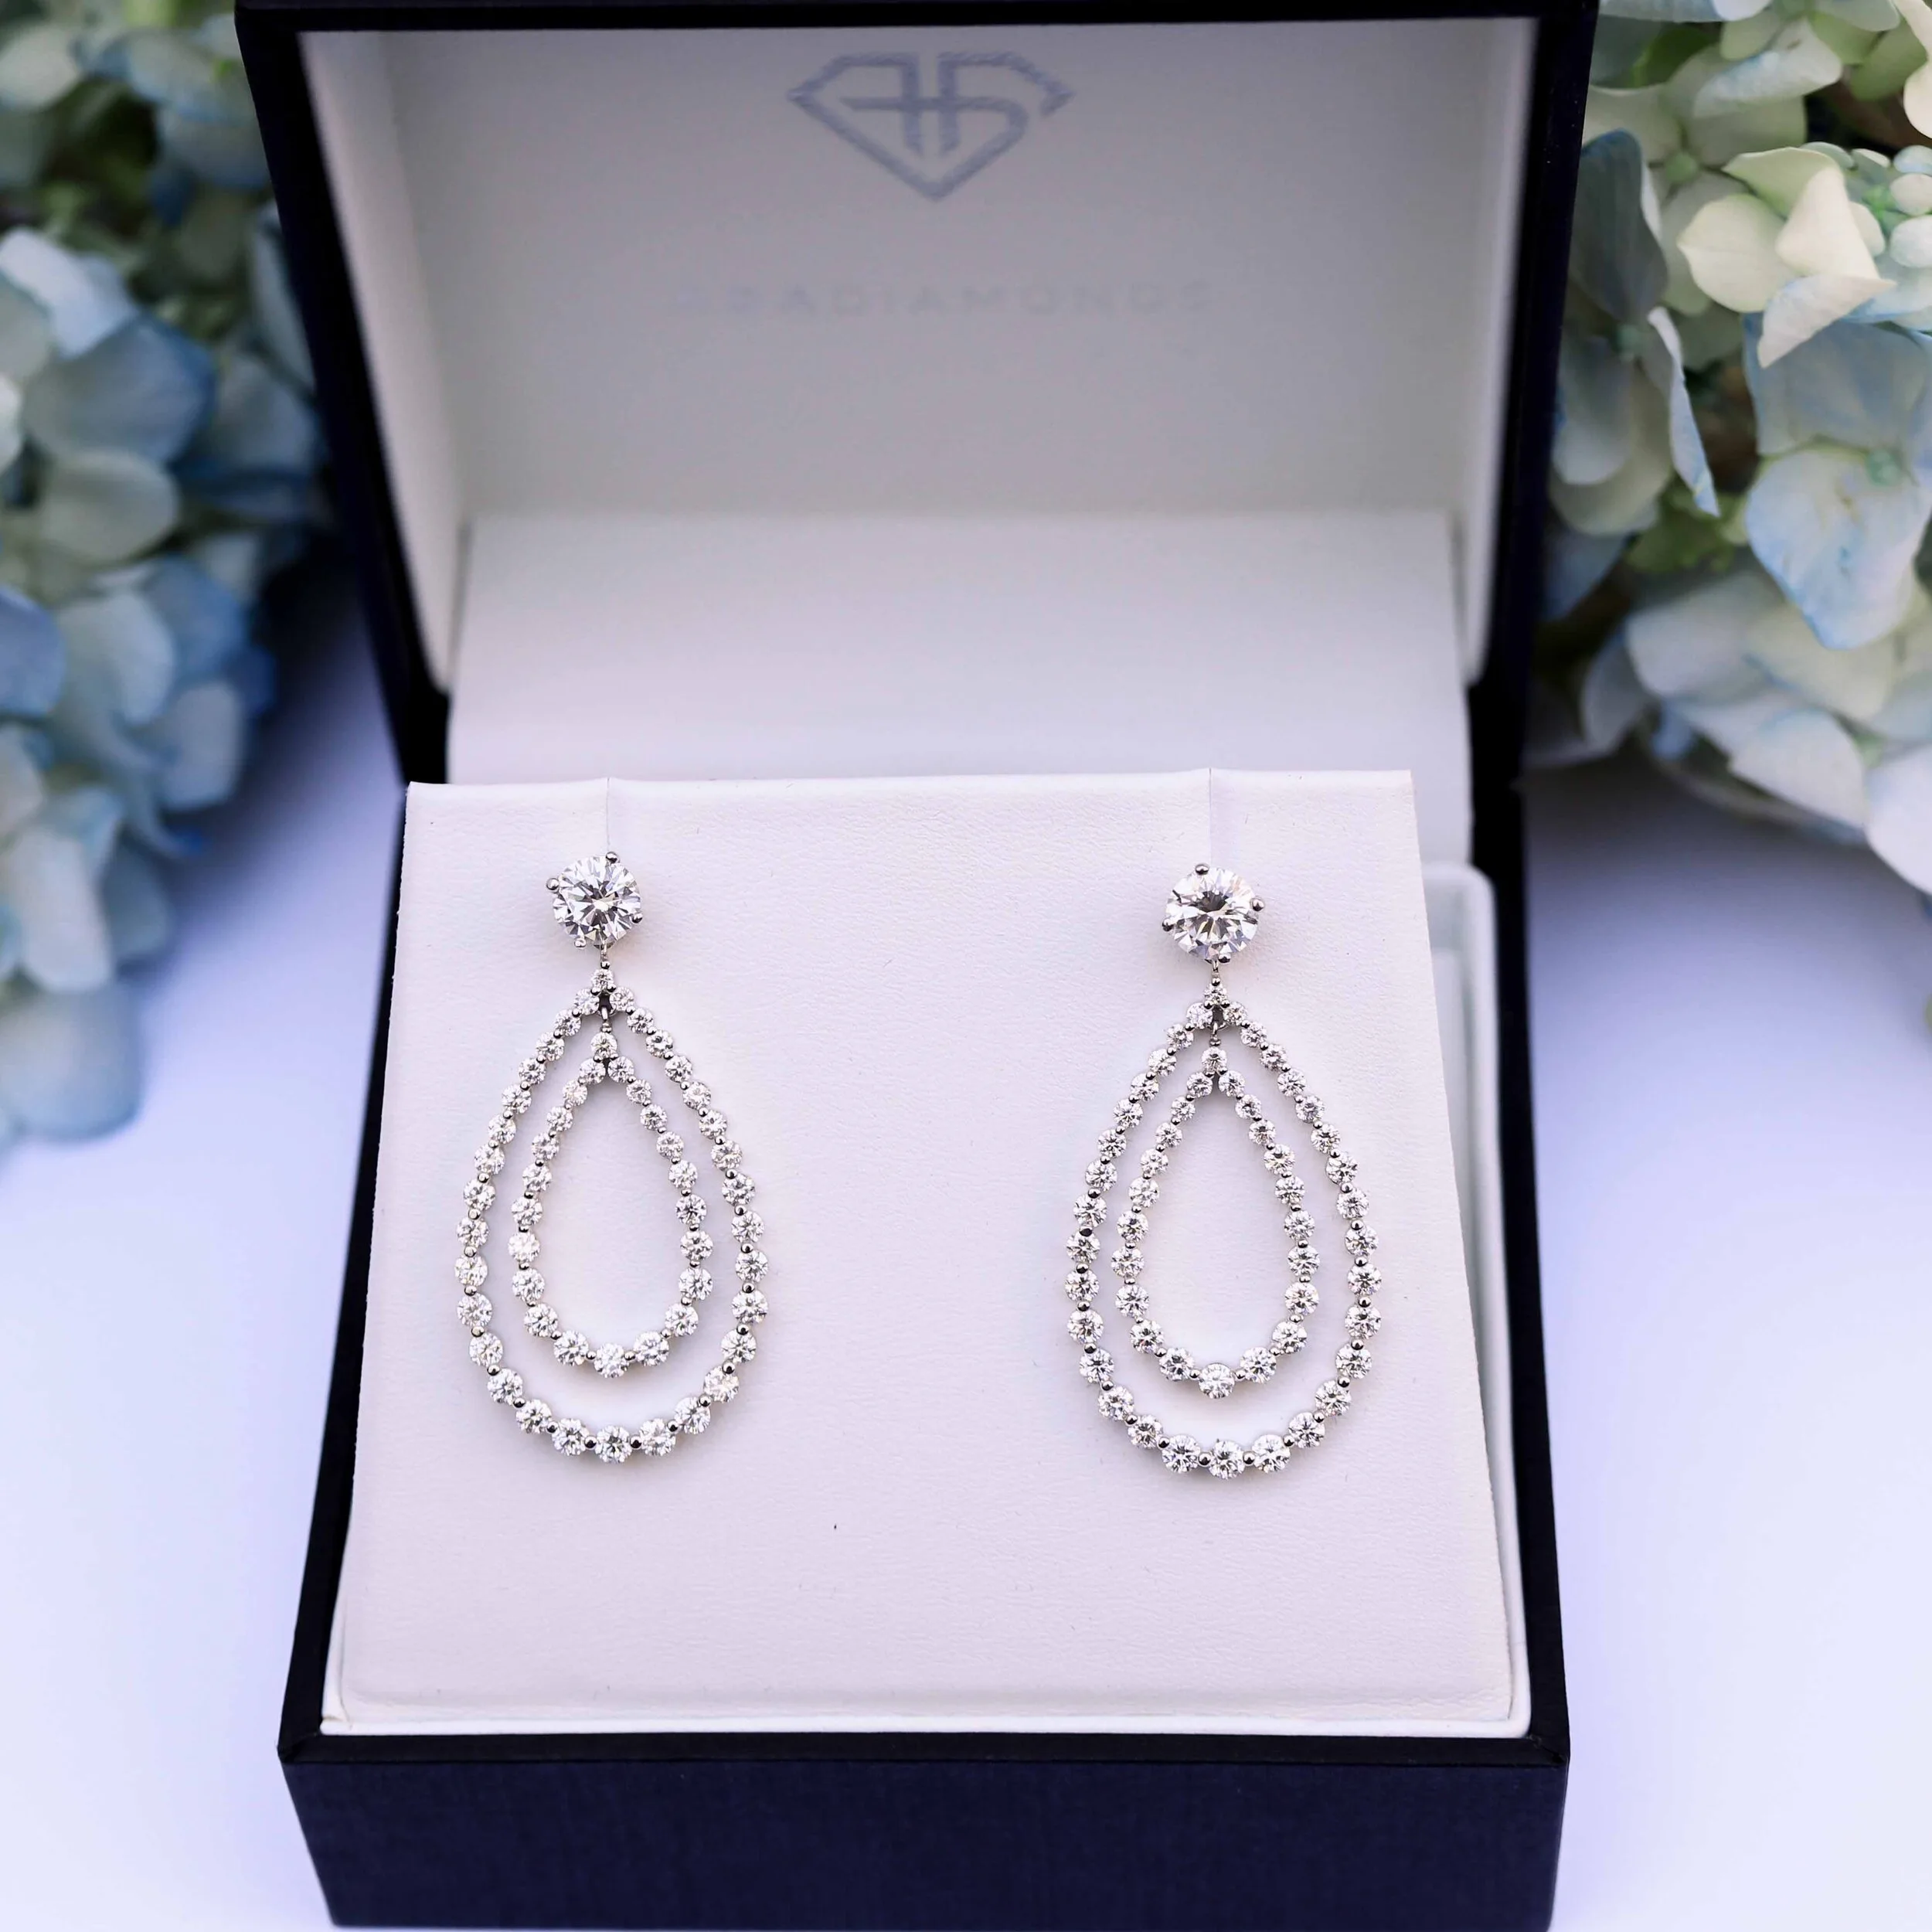 3.5 Carat Round Diamonds set in 18k White Gold Double Open Pear Shaped Diamond Earring Jackets (Main View)